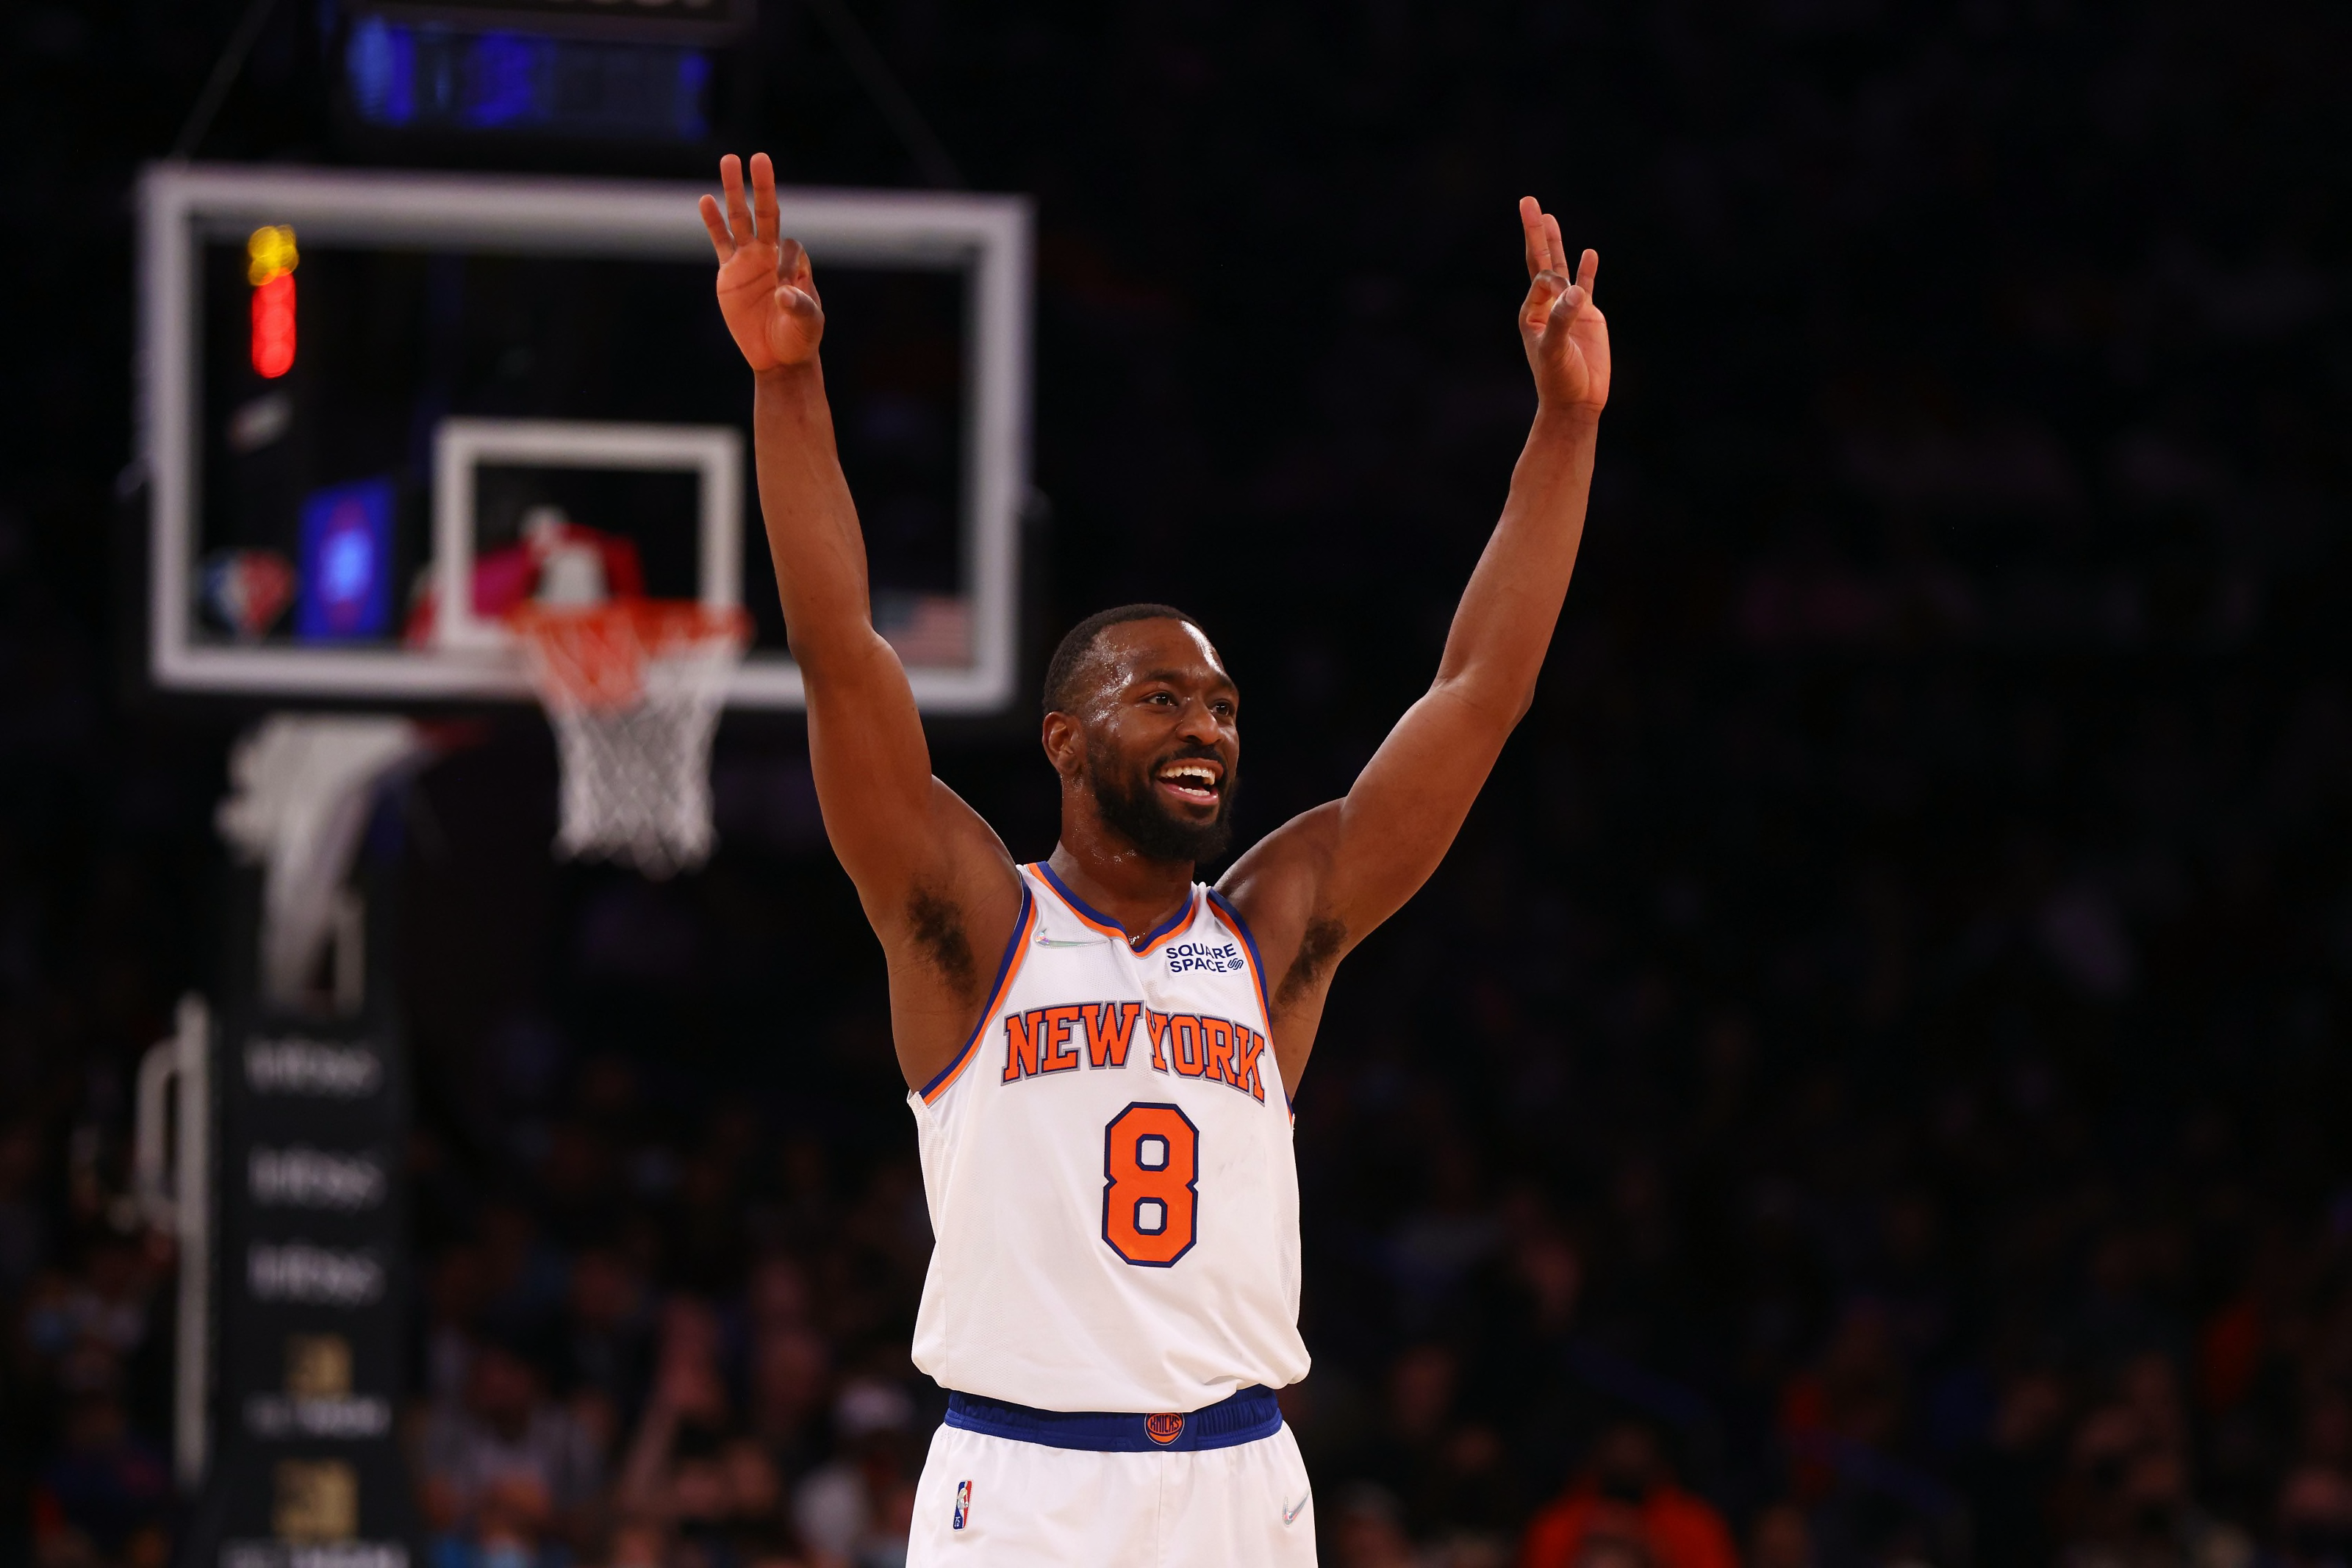 Report: Kemba Walker to join New York Knicks - The UConn Blog